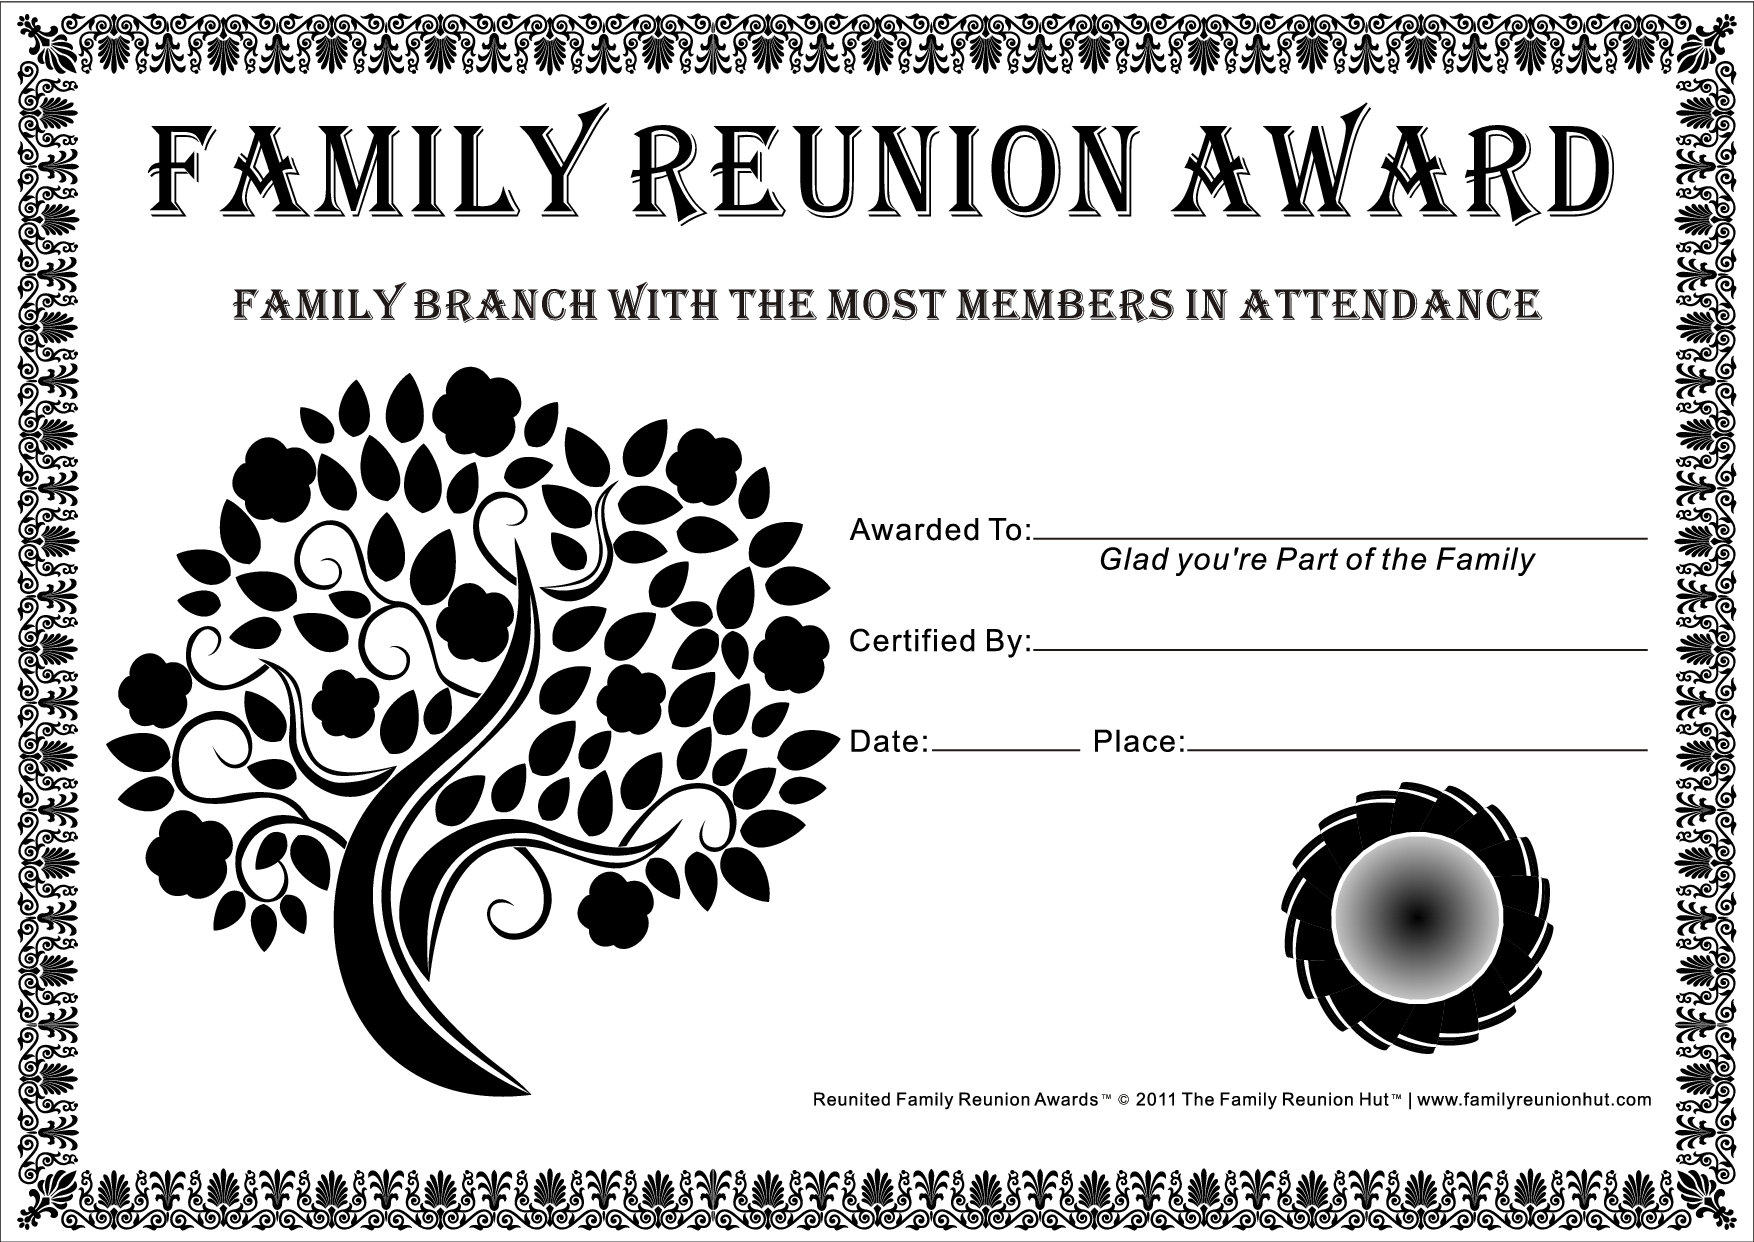 Family Reunion Certificates - Tree In Bloom 2 Is A Free Family - Free Printable Family Reunion Awards